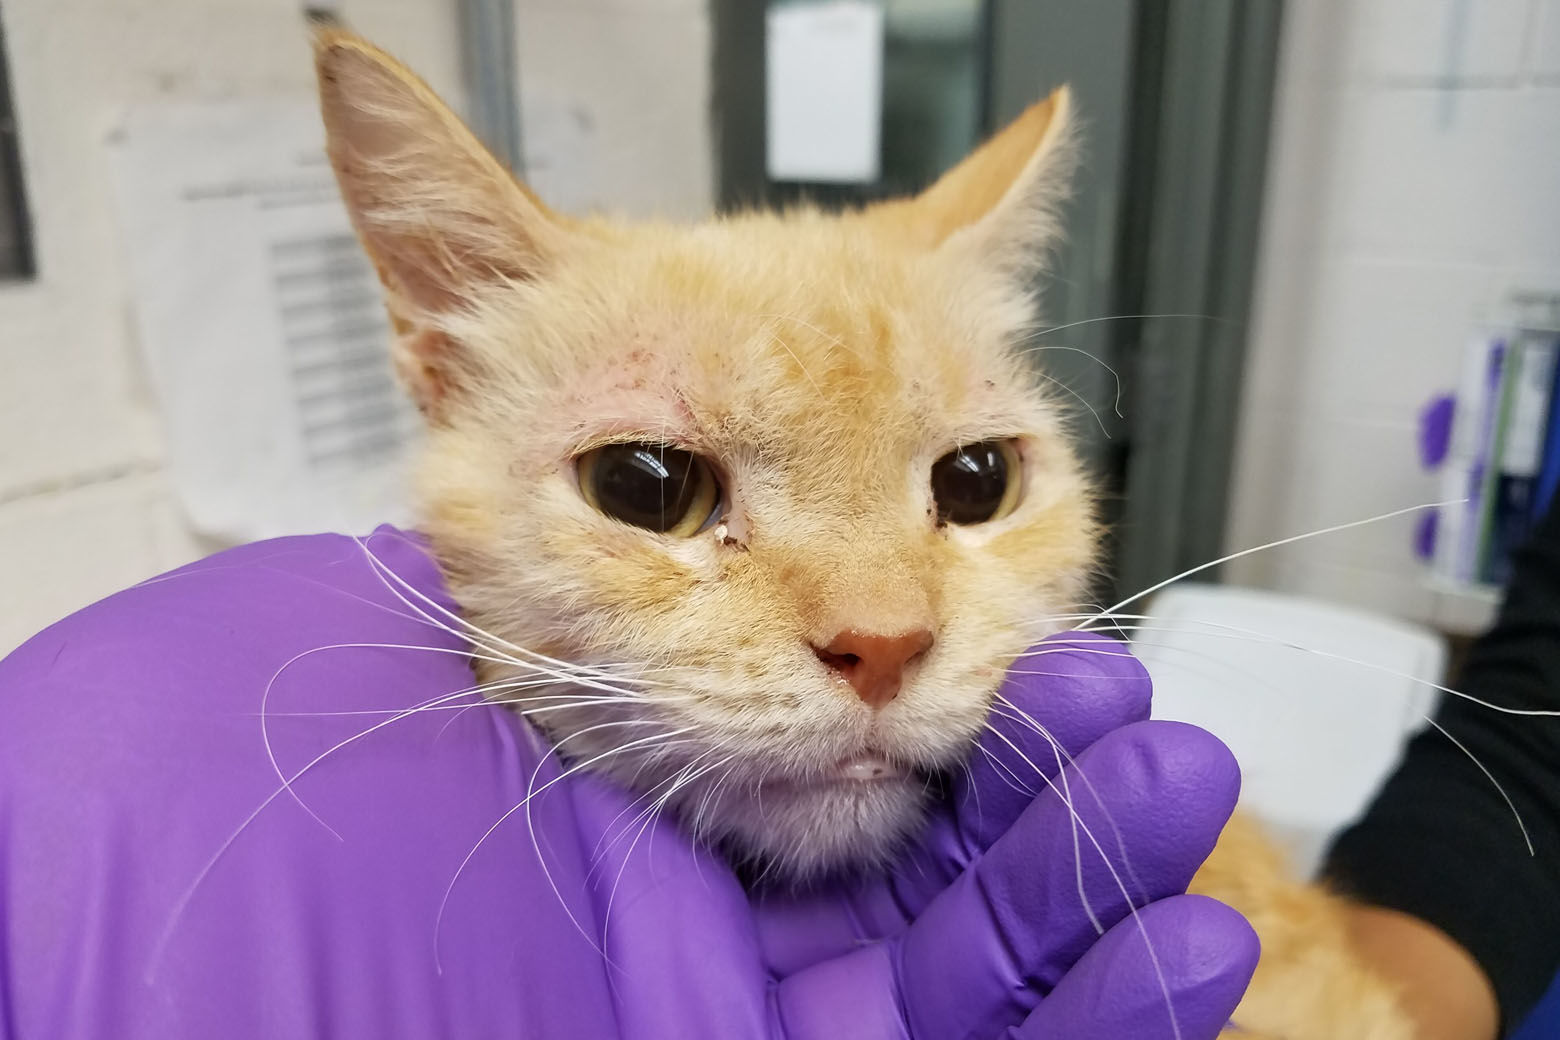 Several of the cats have been adopted and are doing better. This photos show a cat named Sunflower during intake. (Courtesy Humane Rescue Alliance)